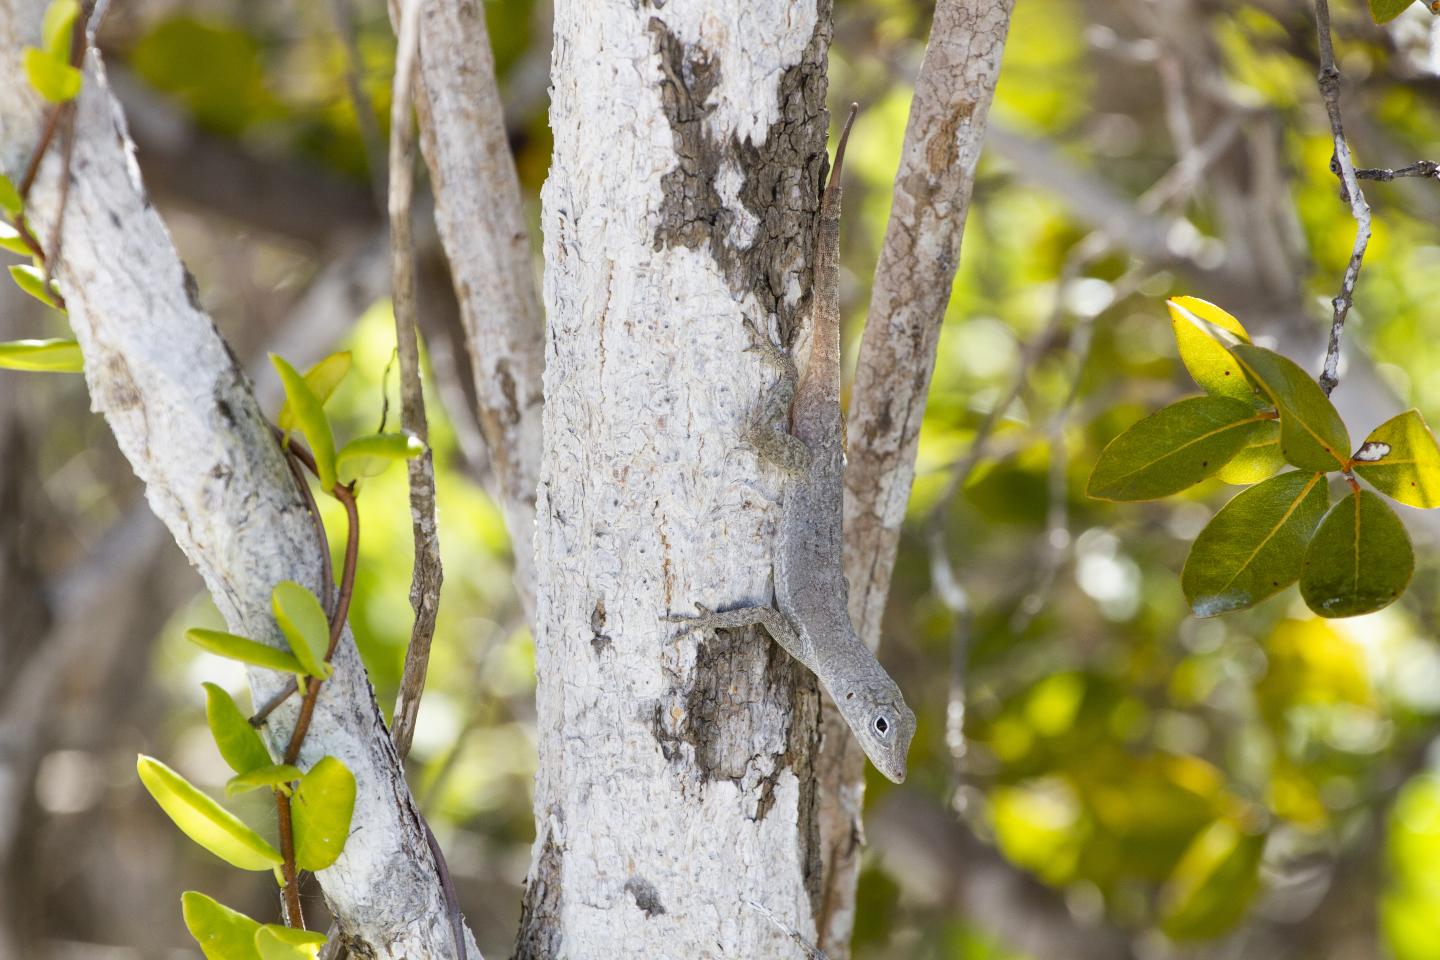 Turks and Caicos anole